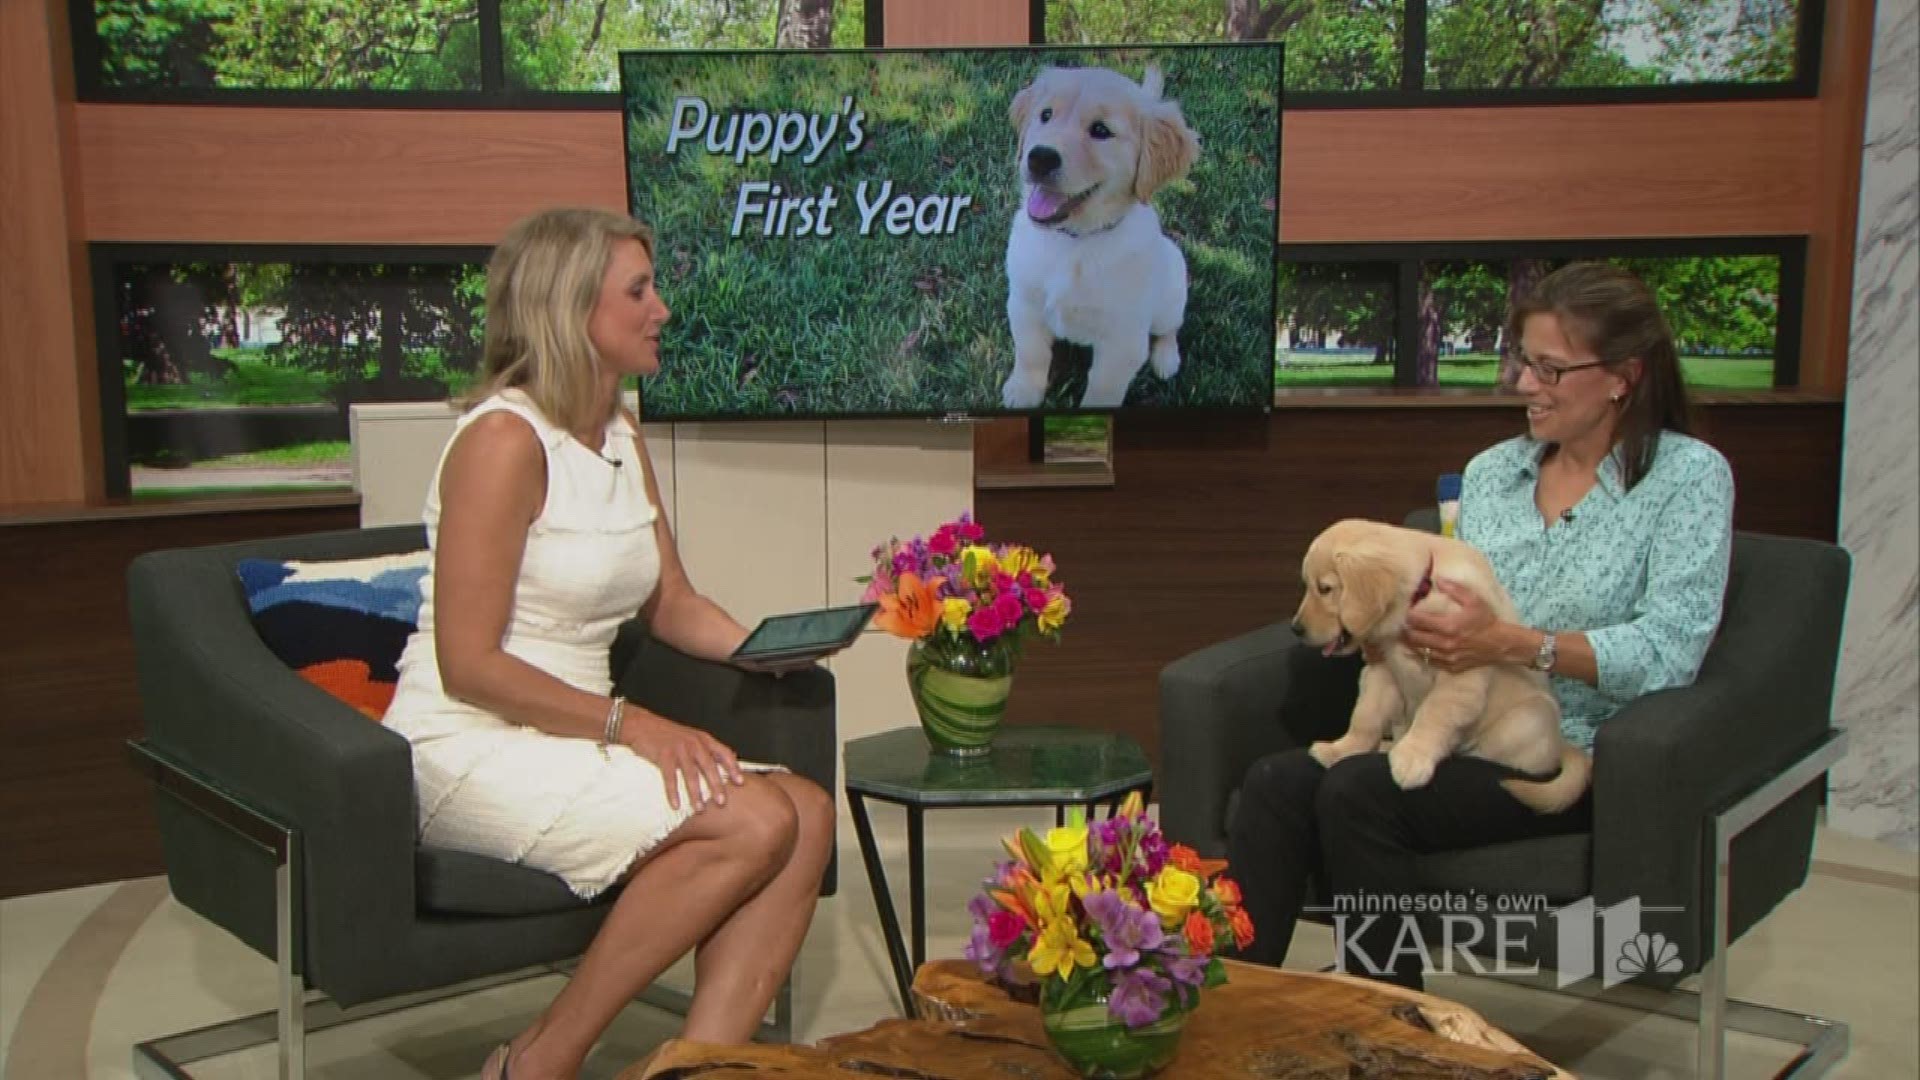 Bringing home a new fur-baby? Dog trainer Kathryn Newman and Poppy, an adorable golden retriever puppy, discuss tips and tricks to training your puppy from the moment you bring them home.